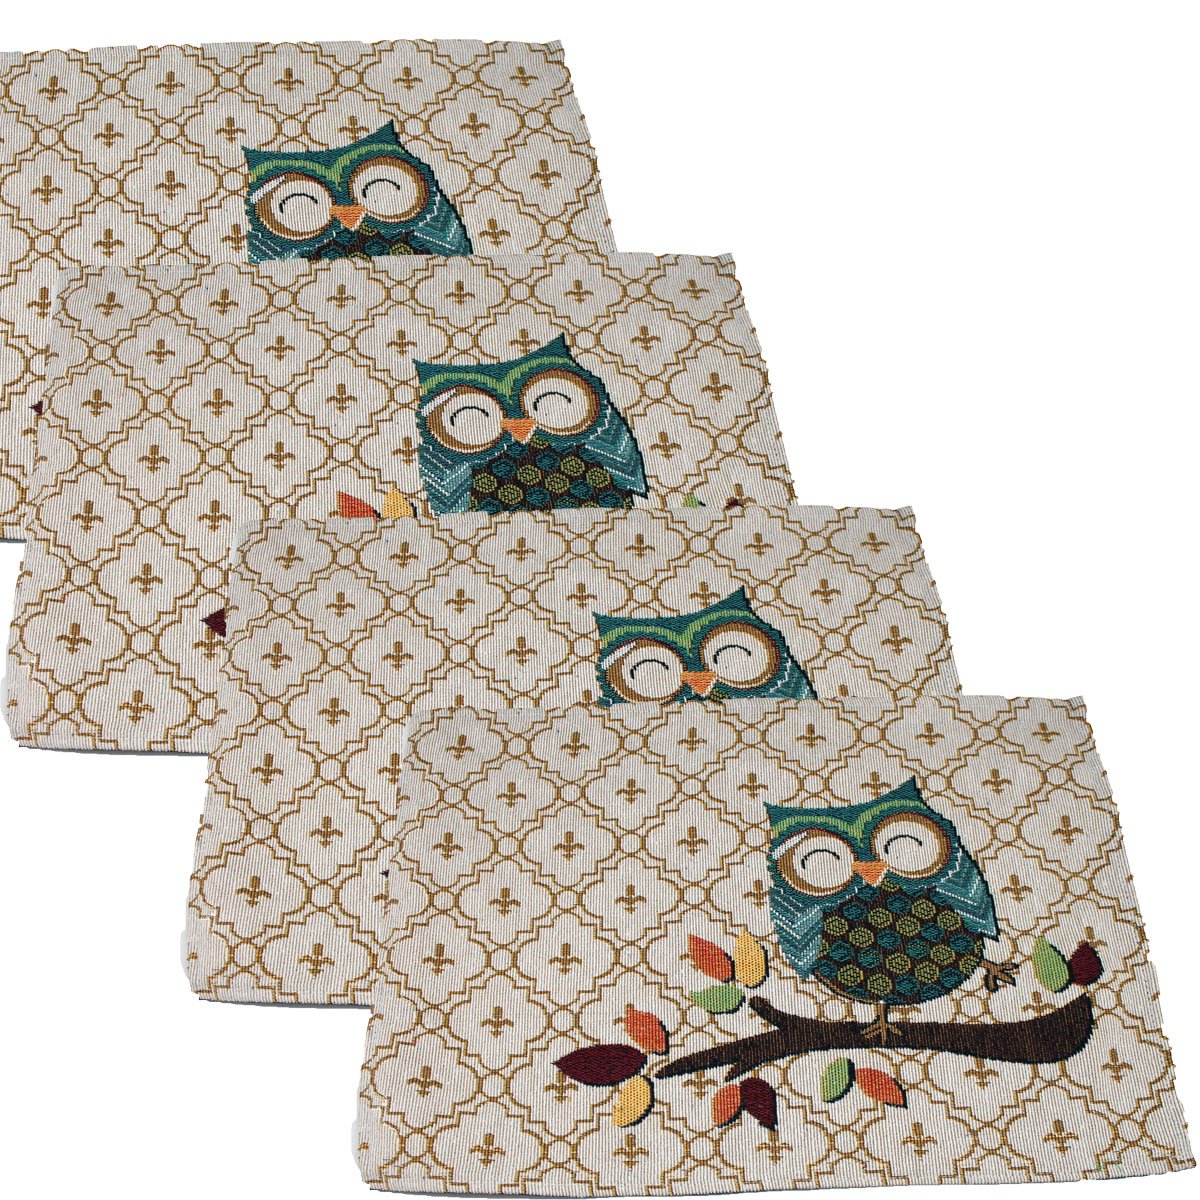 Set of 4 Fall Owl Placemats - Fall/Autumn Tapestry Style Home Decor Set